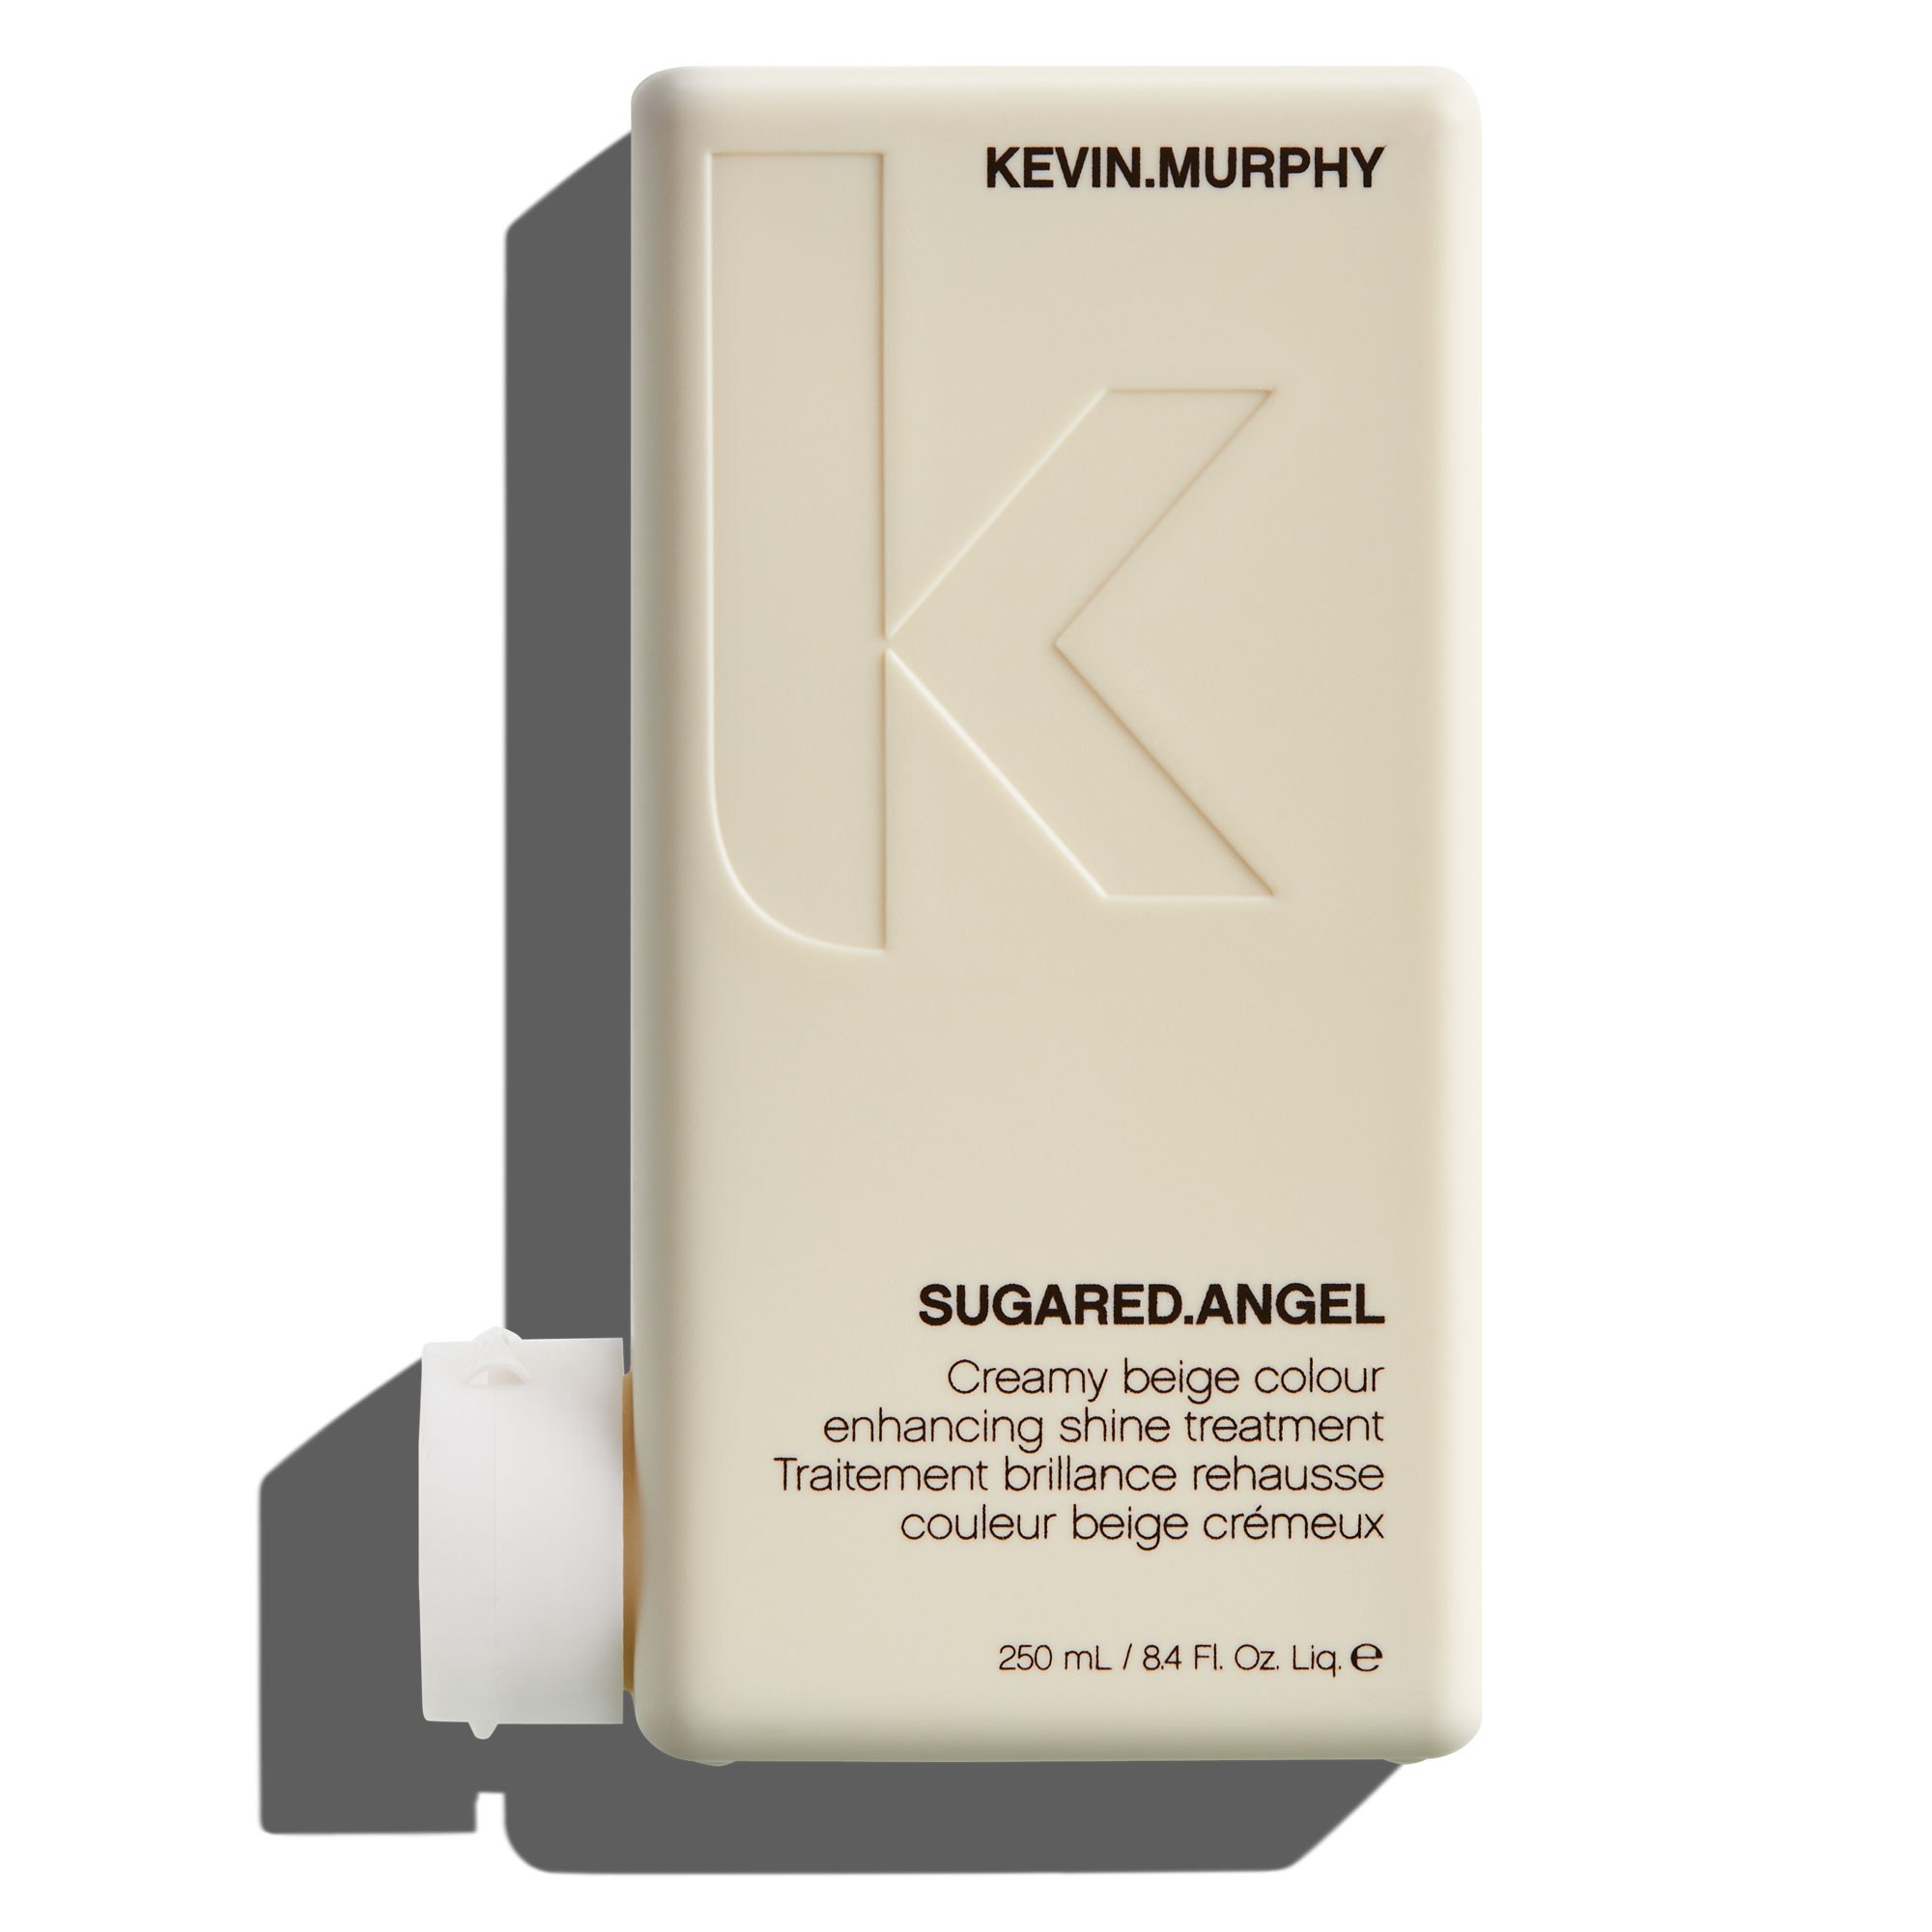 KEVIN.MURPHY SUGARED.ANGEL